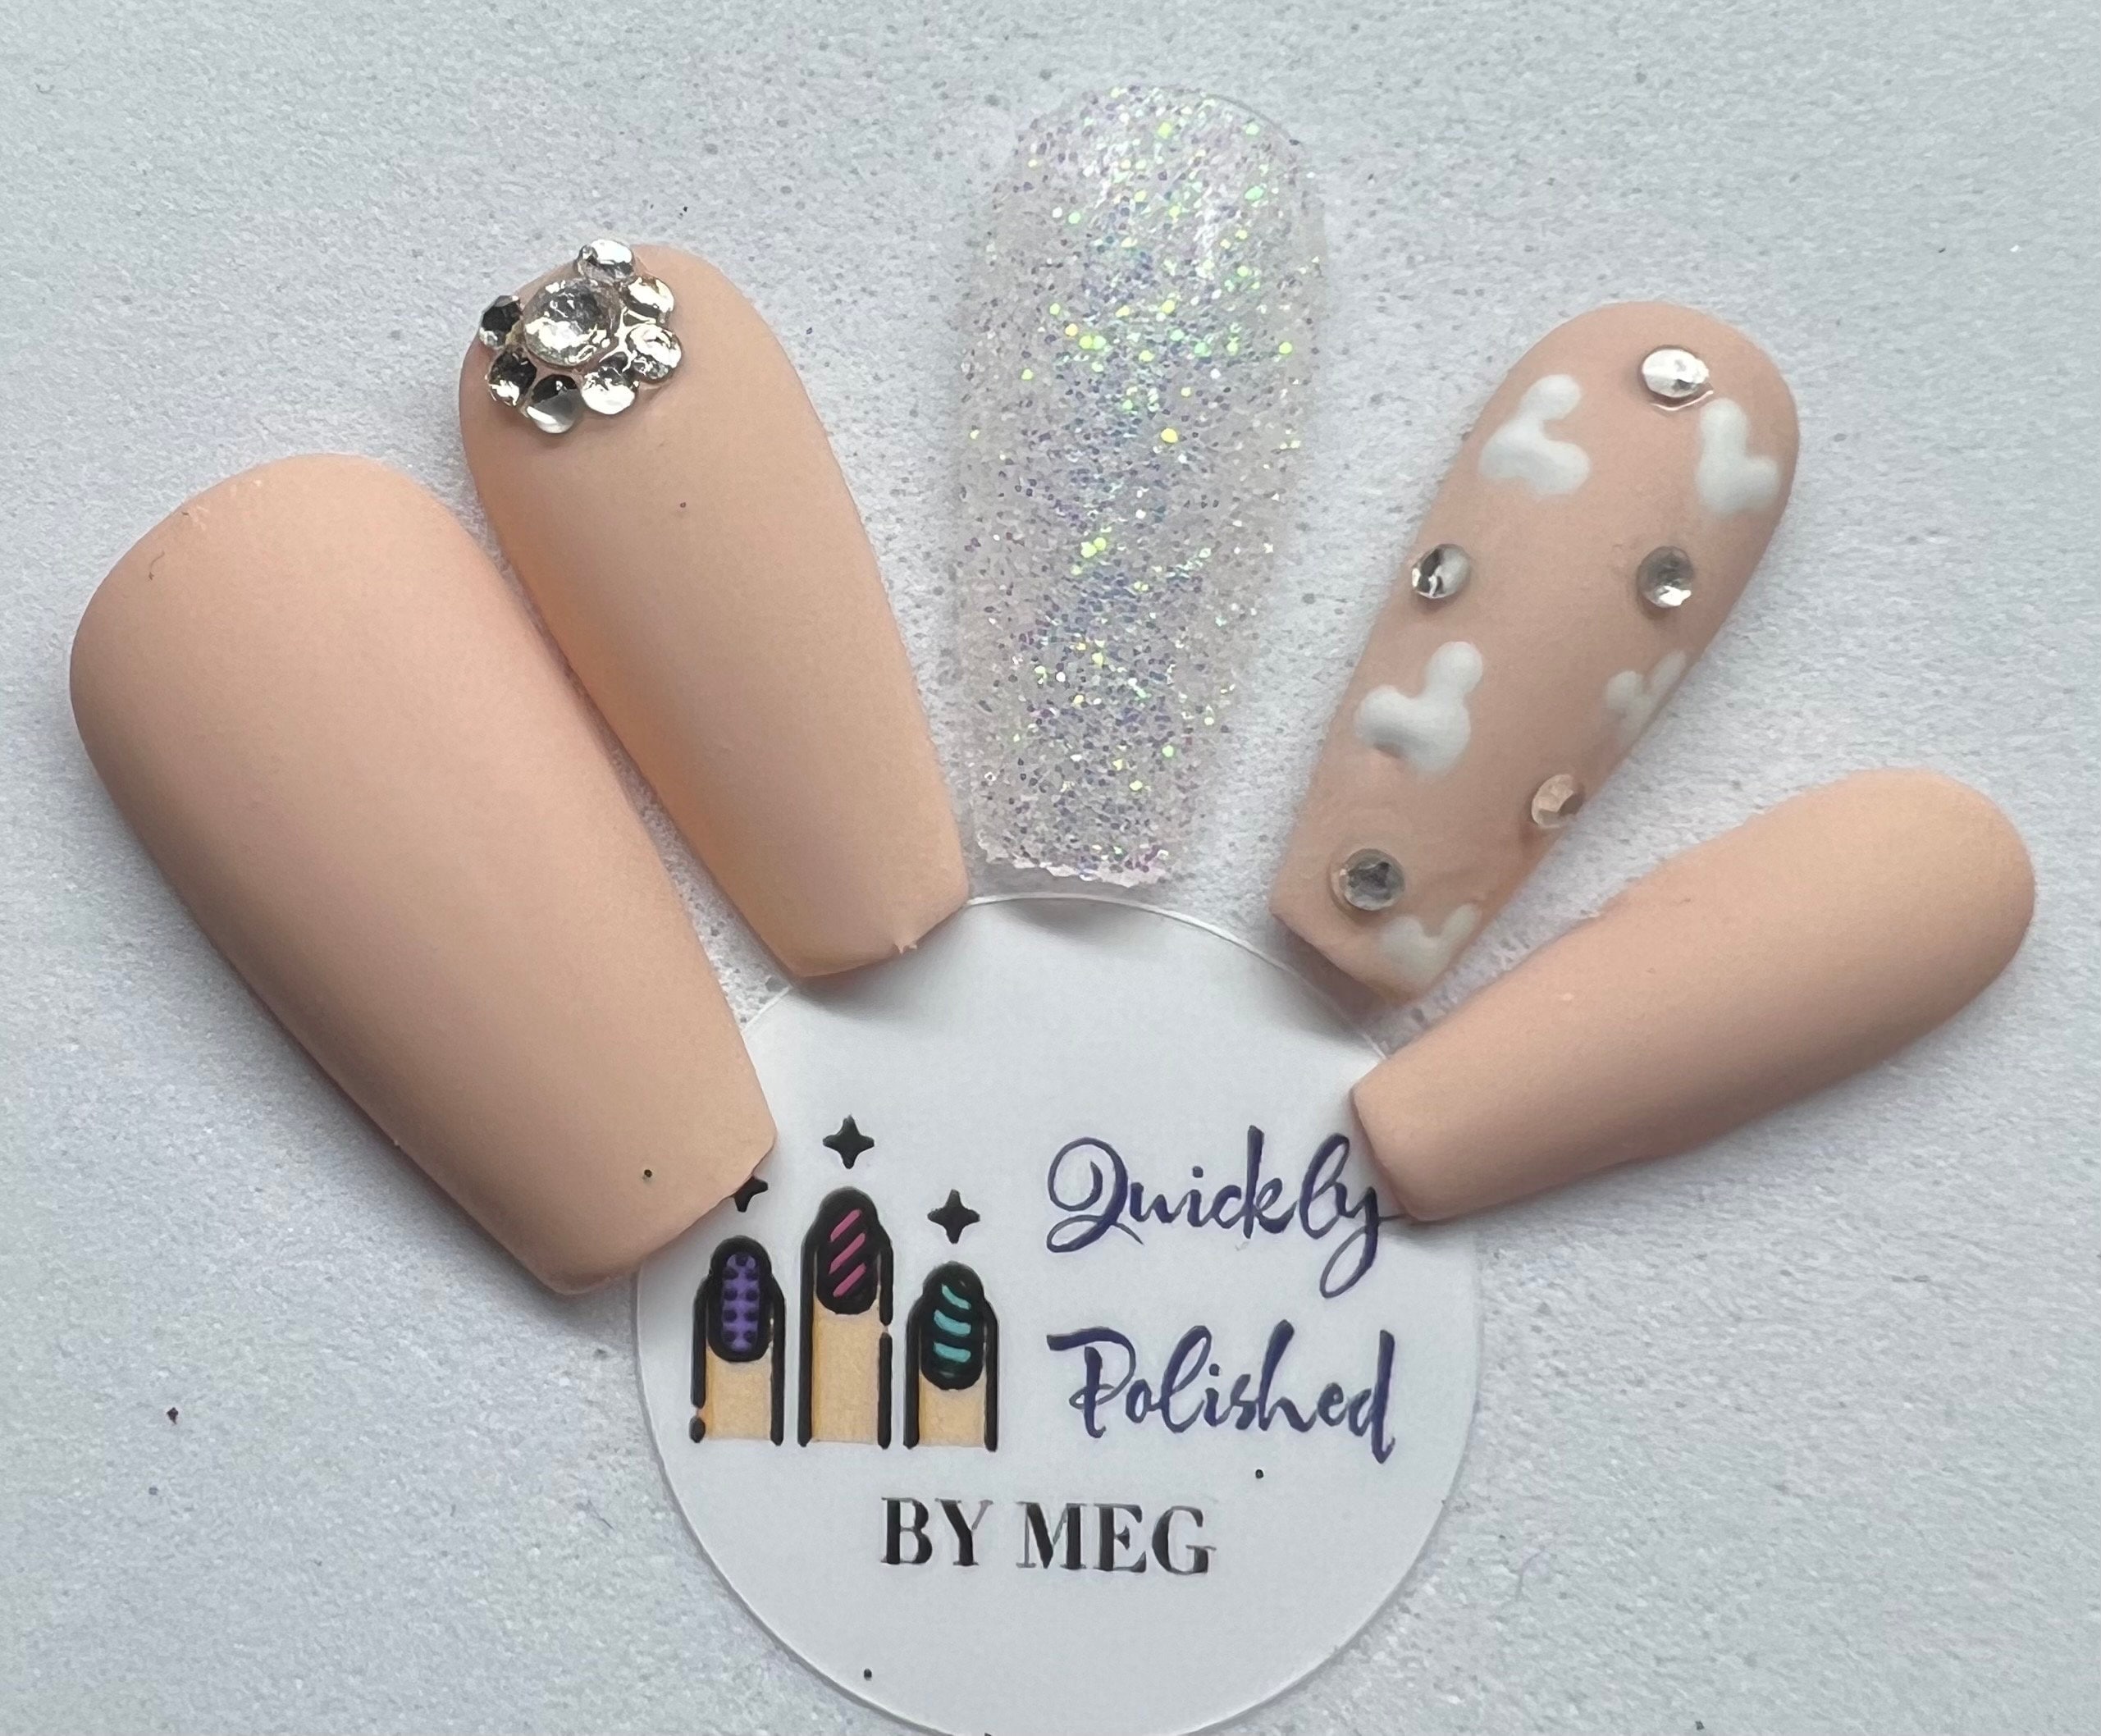 Jeanette Flores | Are you ready for the Mickey Bat nails tutorial??!  🐭🦇💅🏽 Stay tuned! Posting later on today💖 #disney #disneynails  #disne... | Instagram